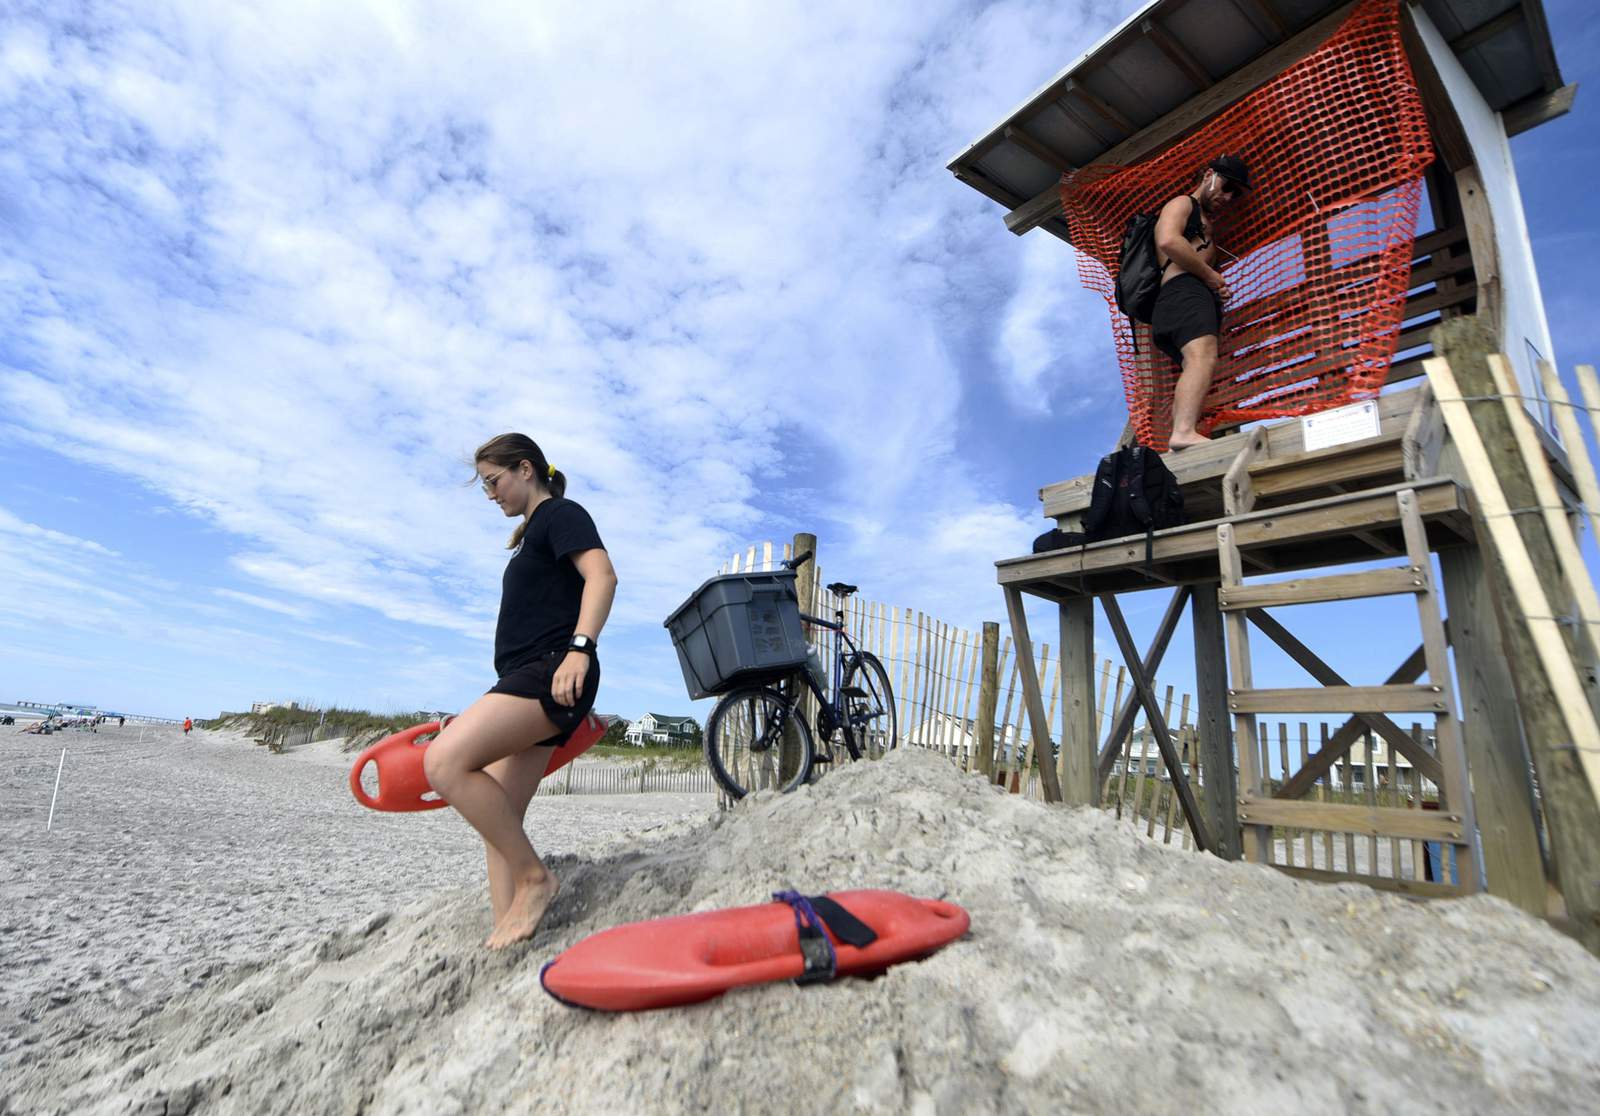 Ocean Rescue officials point to water safety ahead of holiday weekend